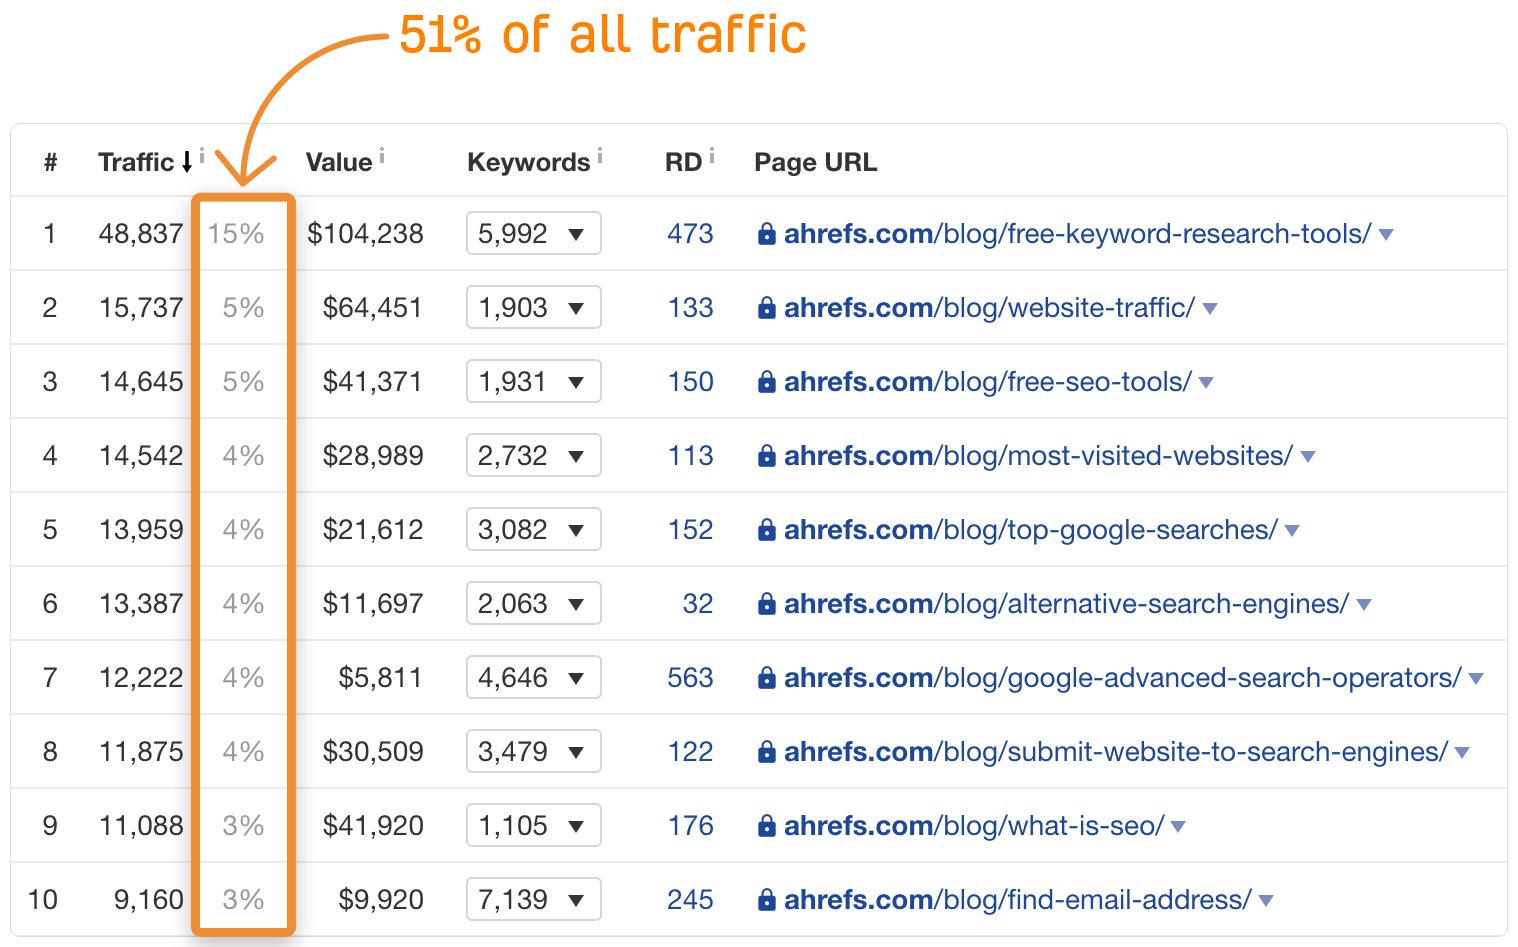 Top 10 pages by organic traffic in Ahrefs' Site Explorer